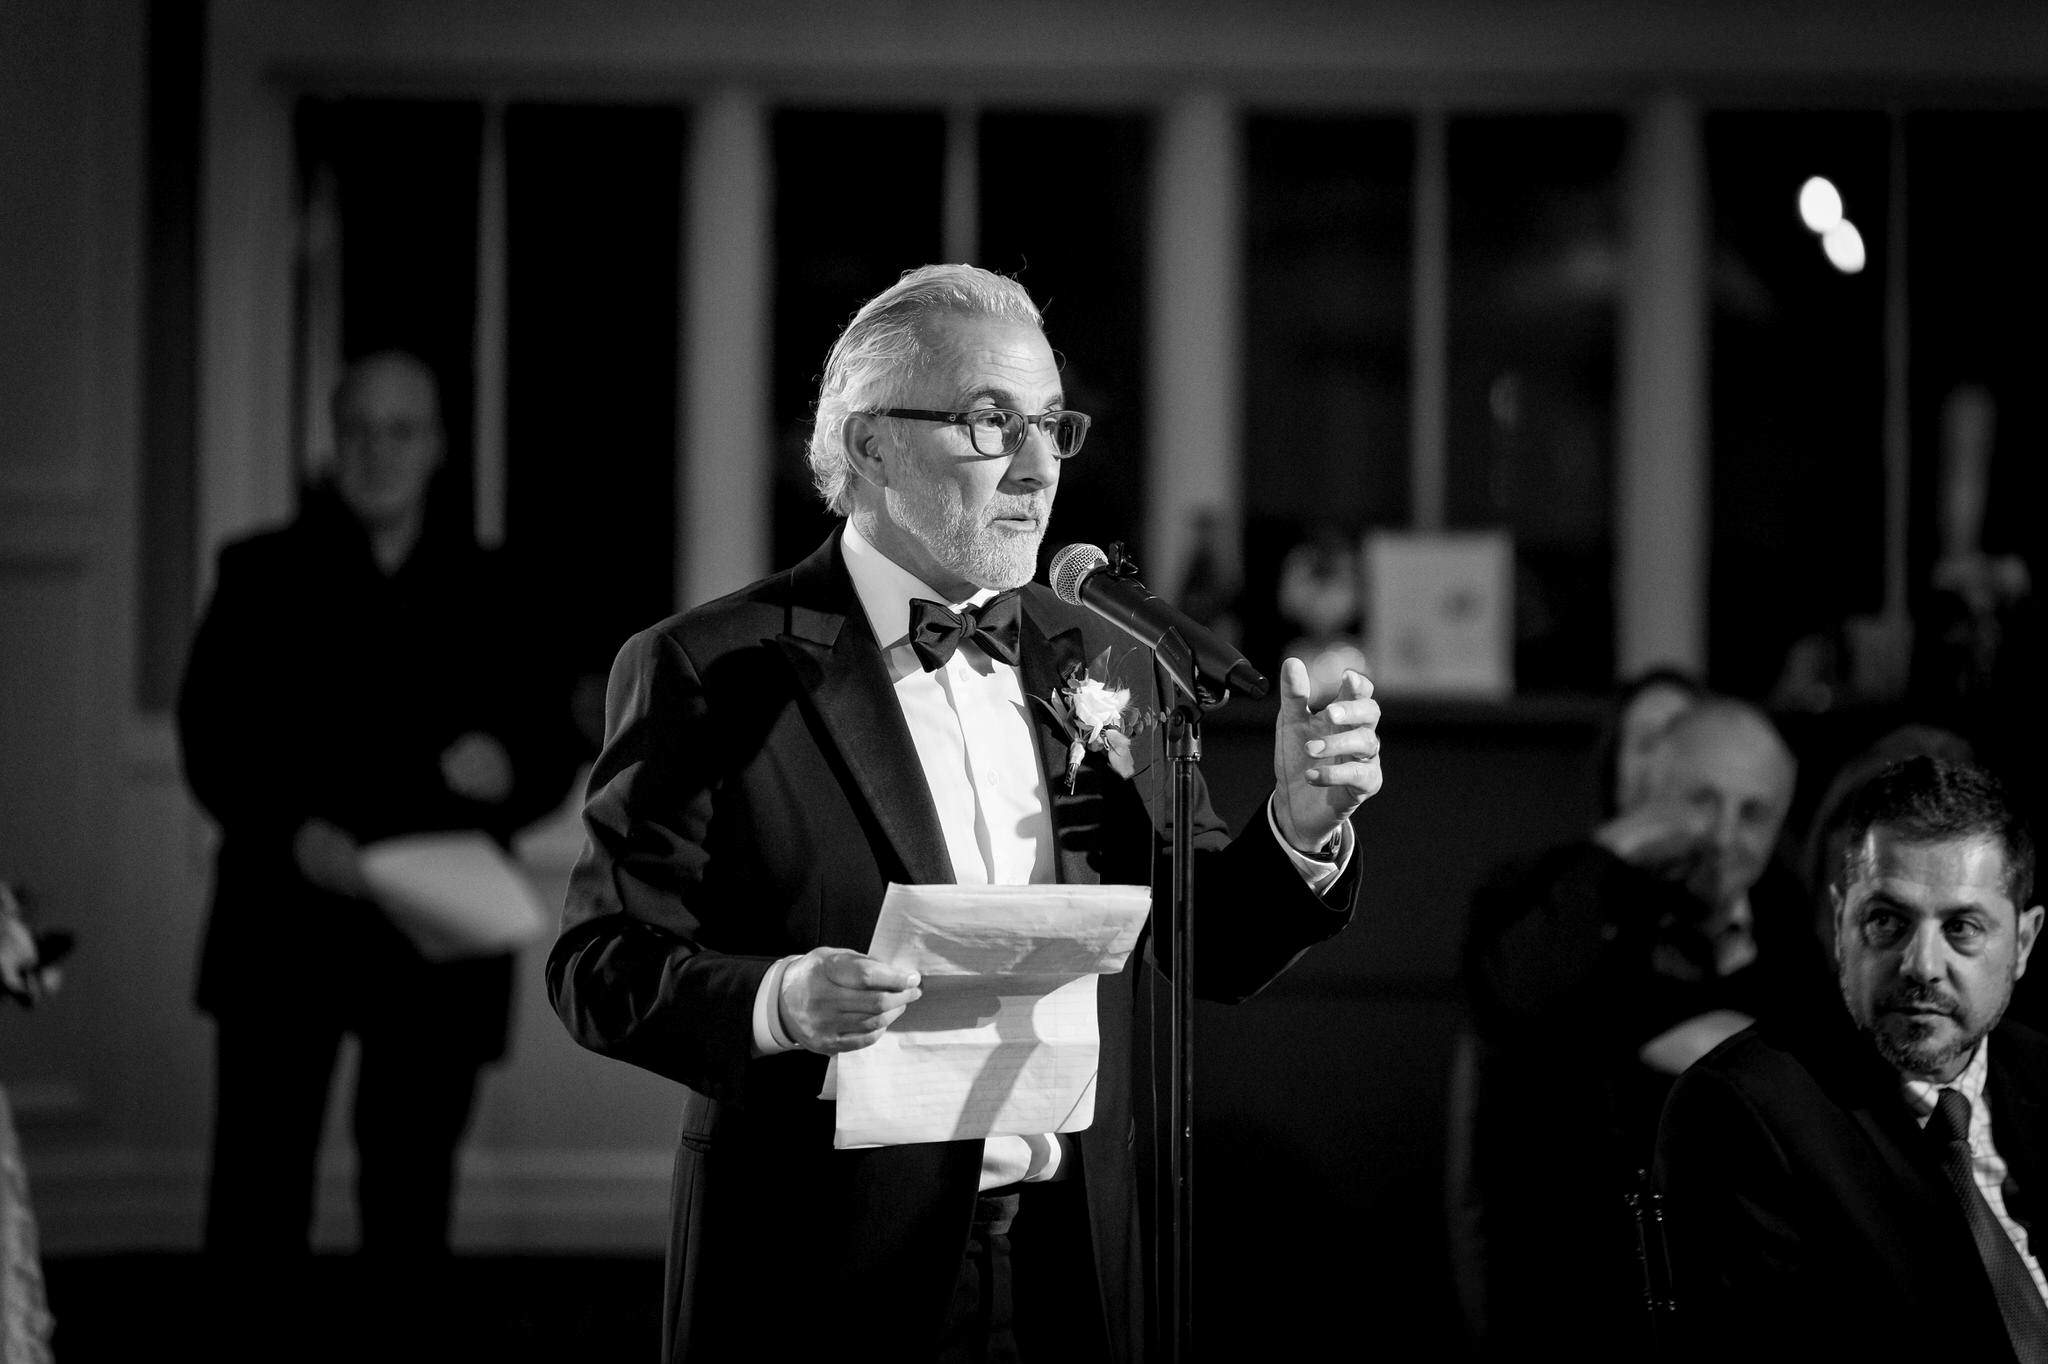 The father of the groom gives a speech while wearing a tuxedo. 